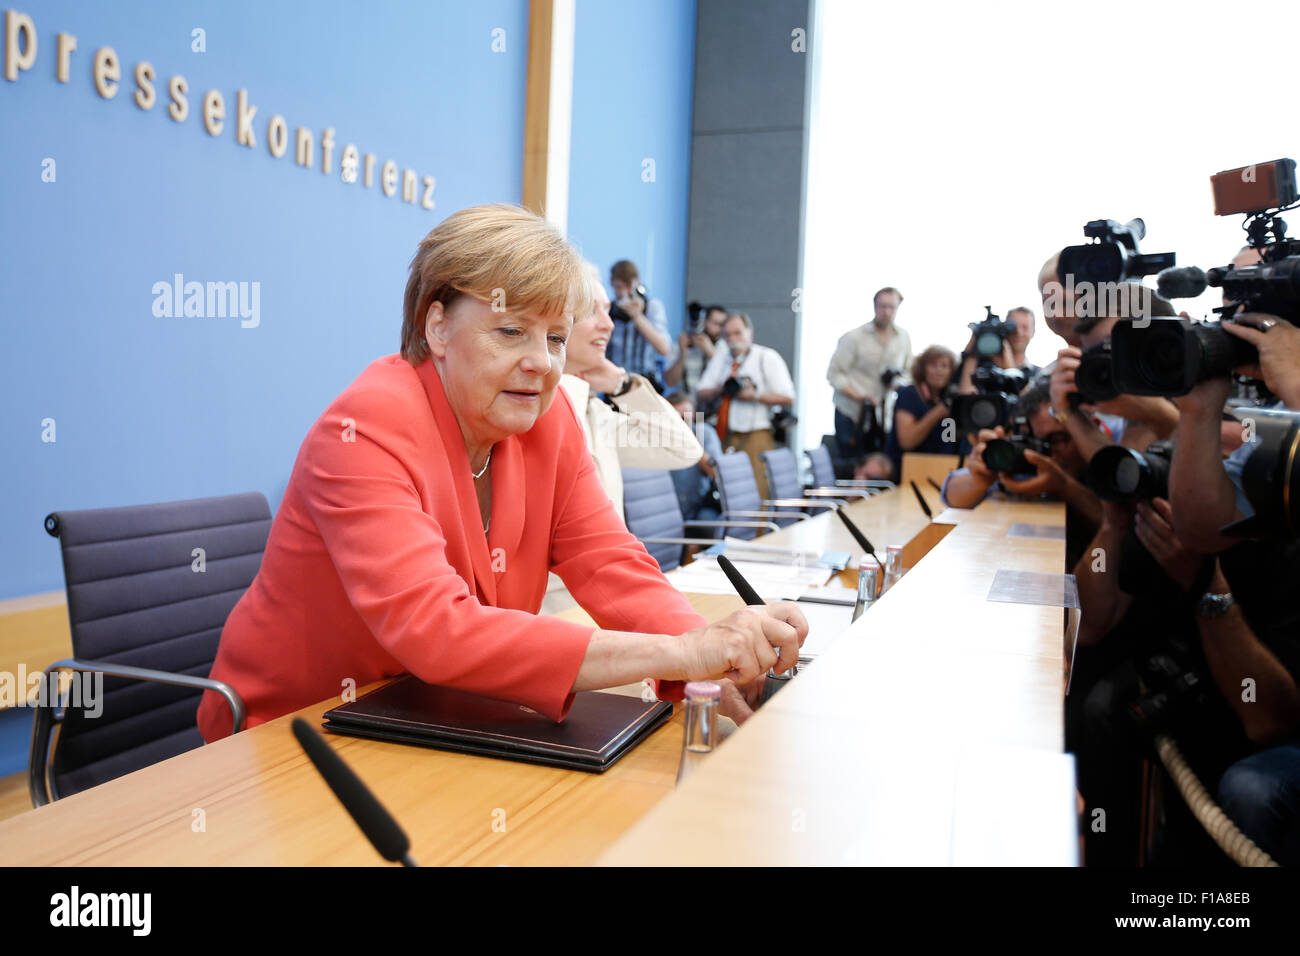 German Chancellor Angela Merkel during press conference on foreign and domestic policy at the house of the federal press conference in Berlin, Germany on 31 august 2015. / Picture: Angela Merkel, german chancellor, answering questions about foreign and domestic policy during a press conference at the house of the federal press conference in Berlin. Stock Photo